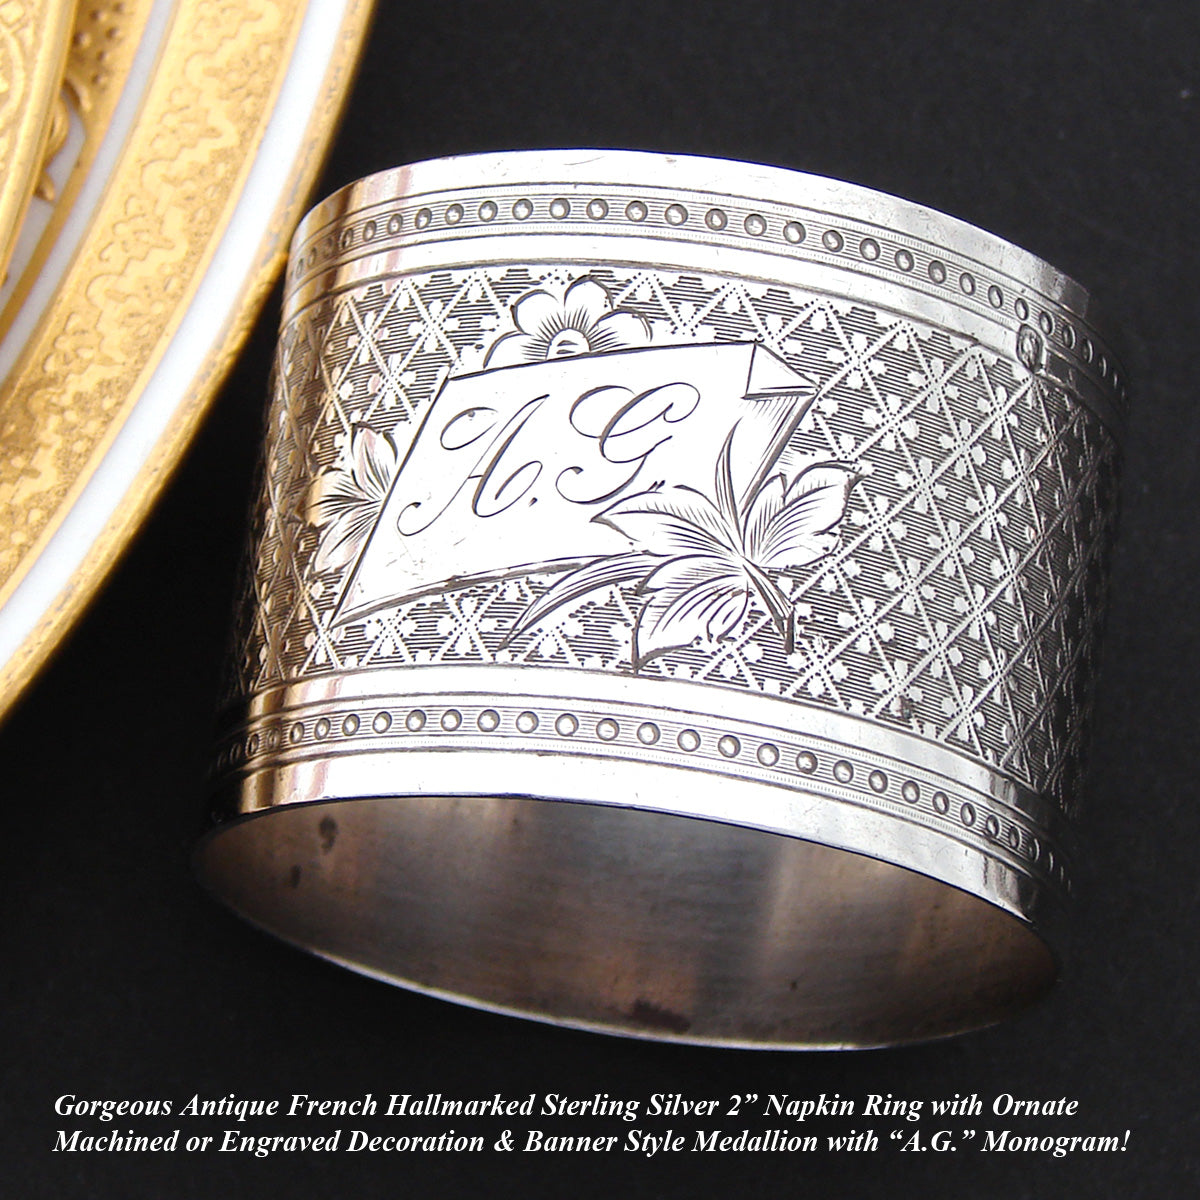 Ornate Antique French Sterling Silver Napkin Ring, Guilloche Style Decoration, "A.G." Monogram